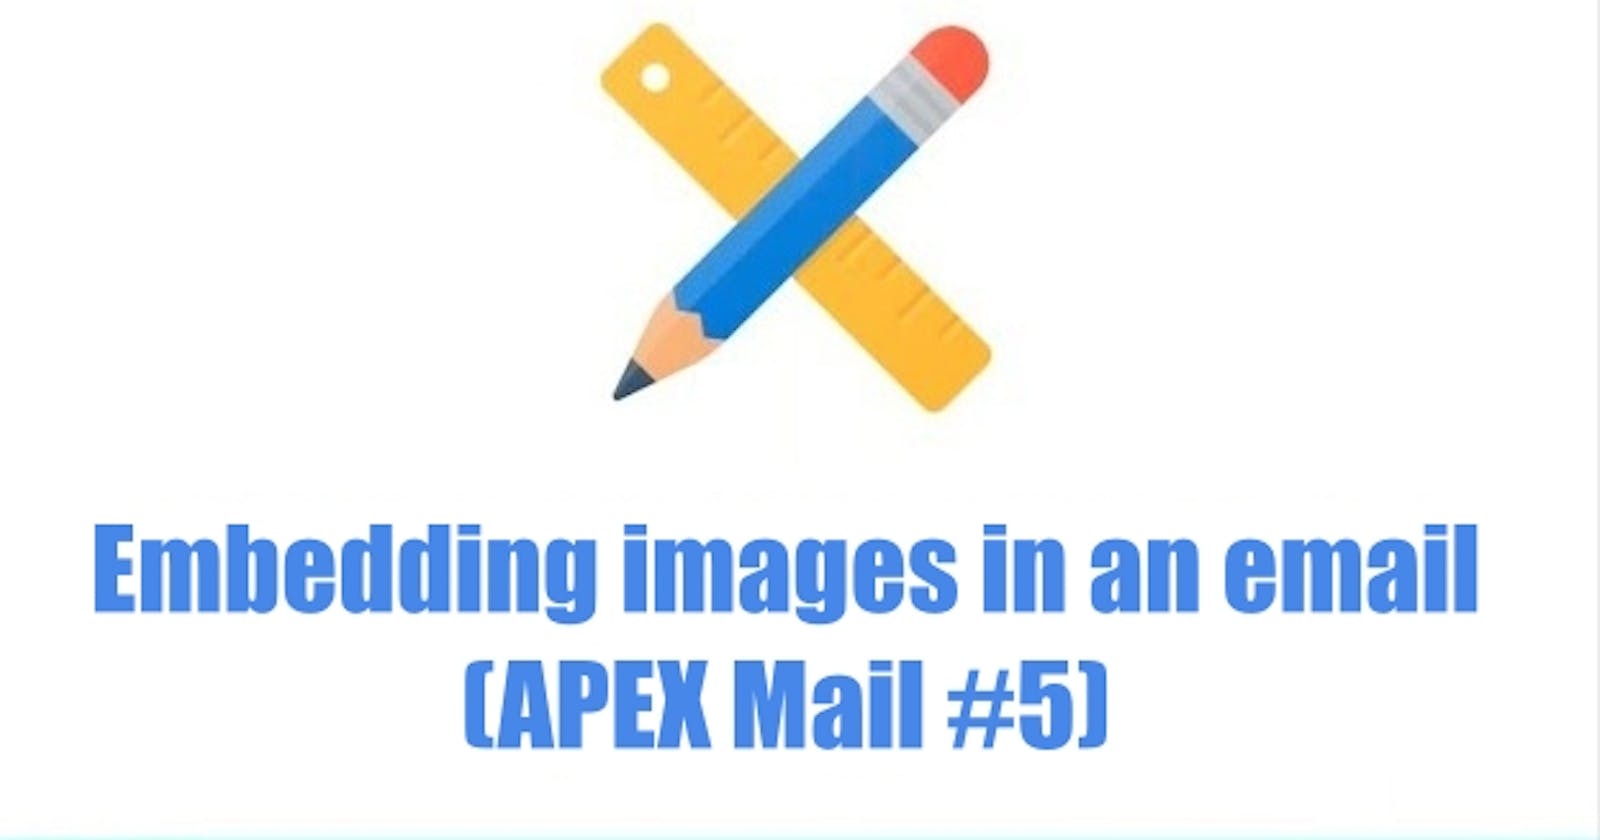 Embedding images in an email (APEX Mail #5)